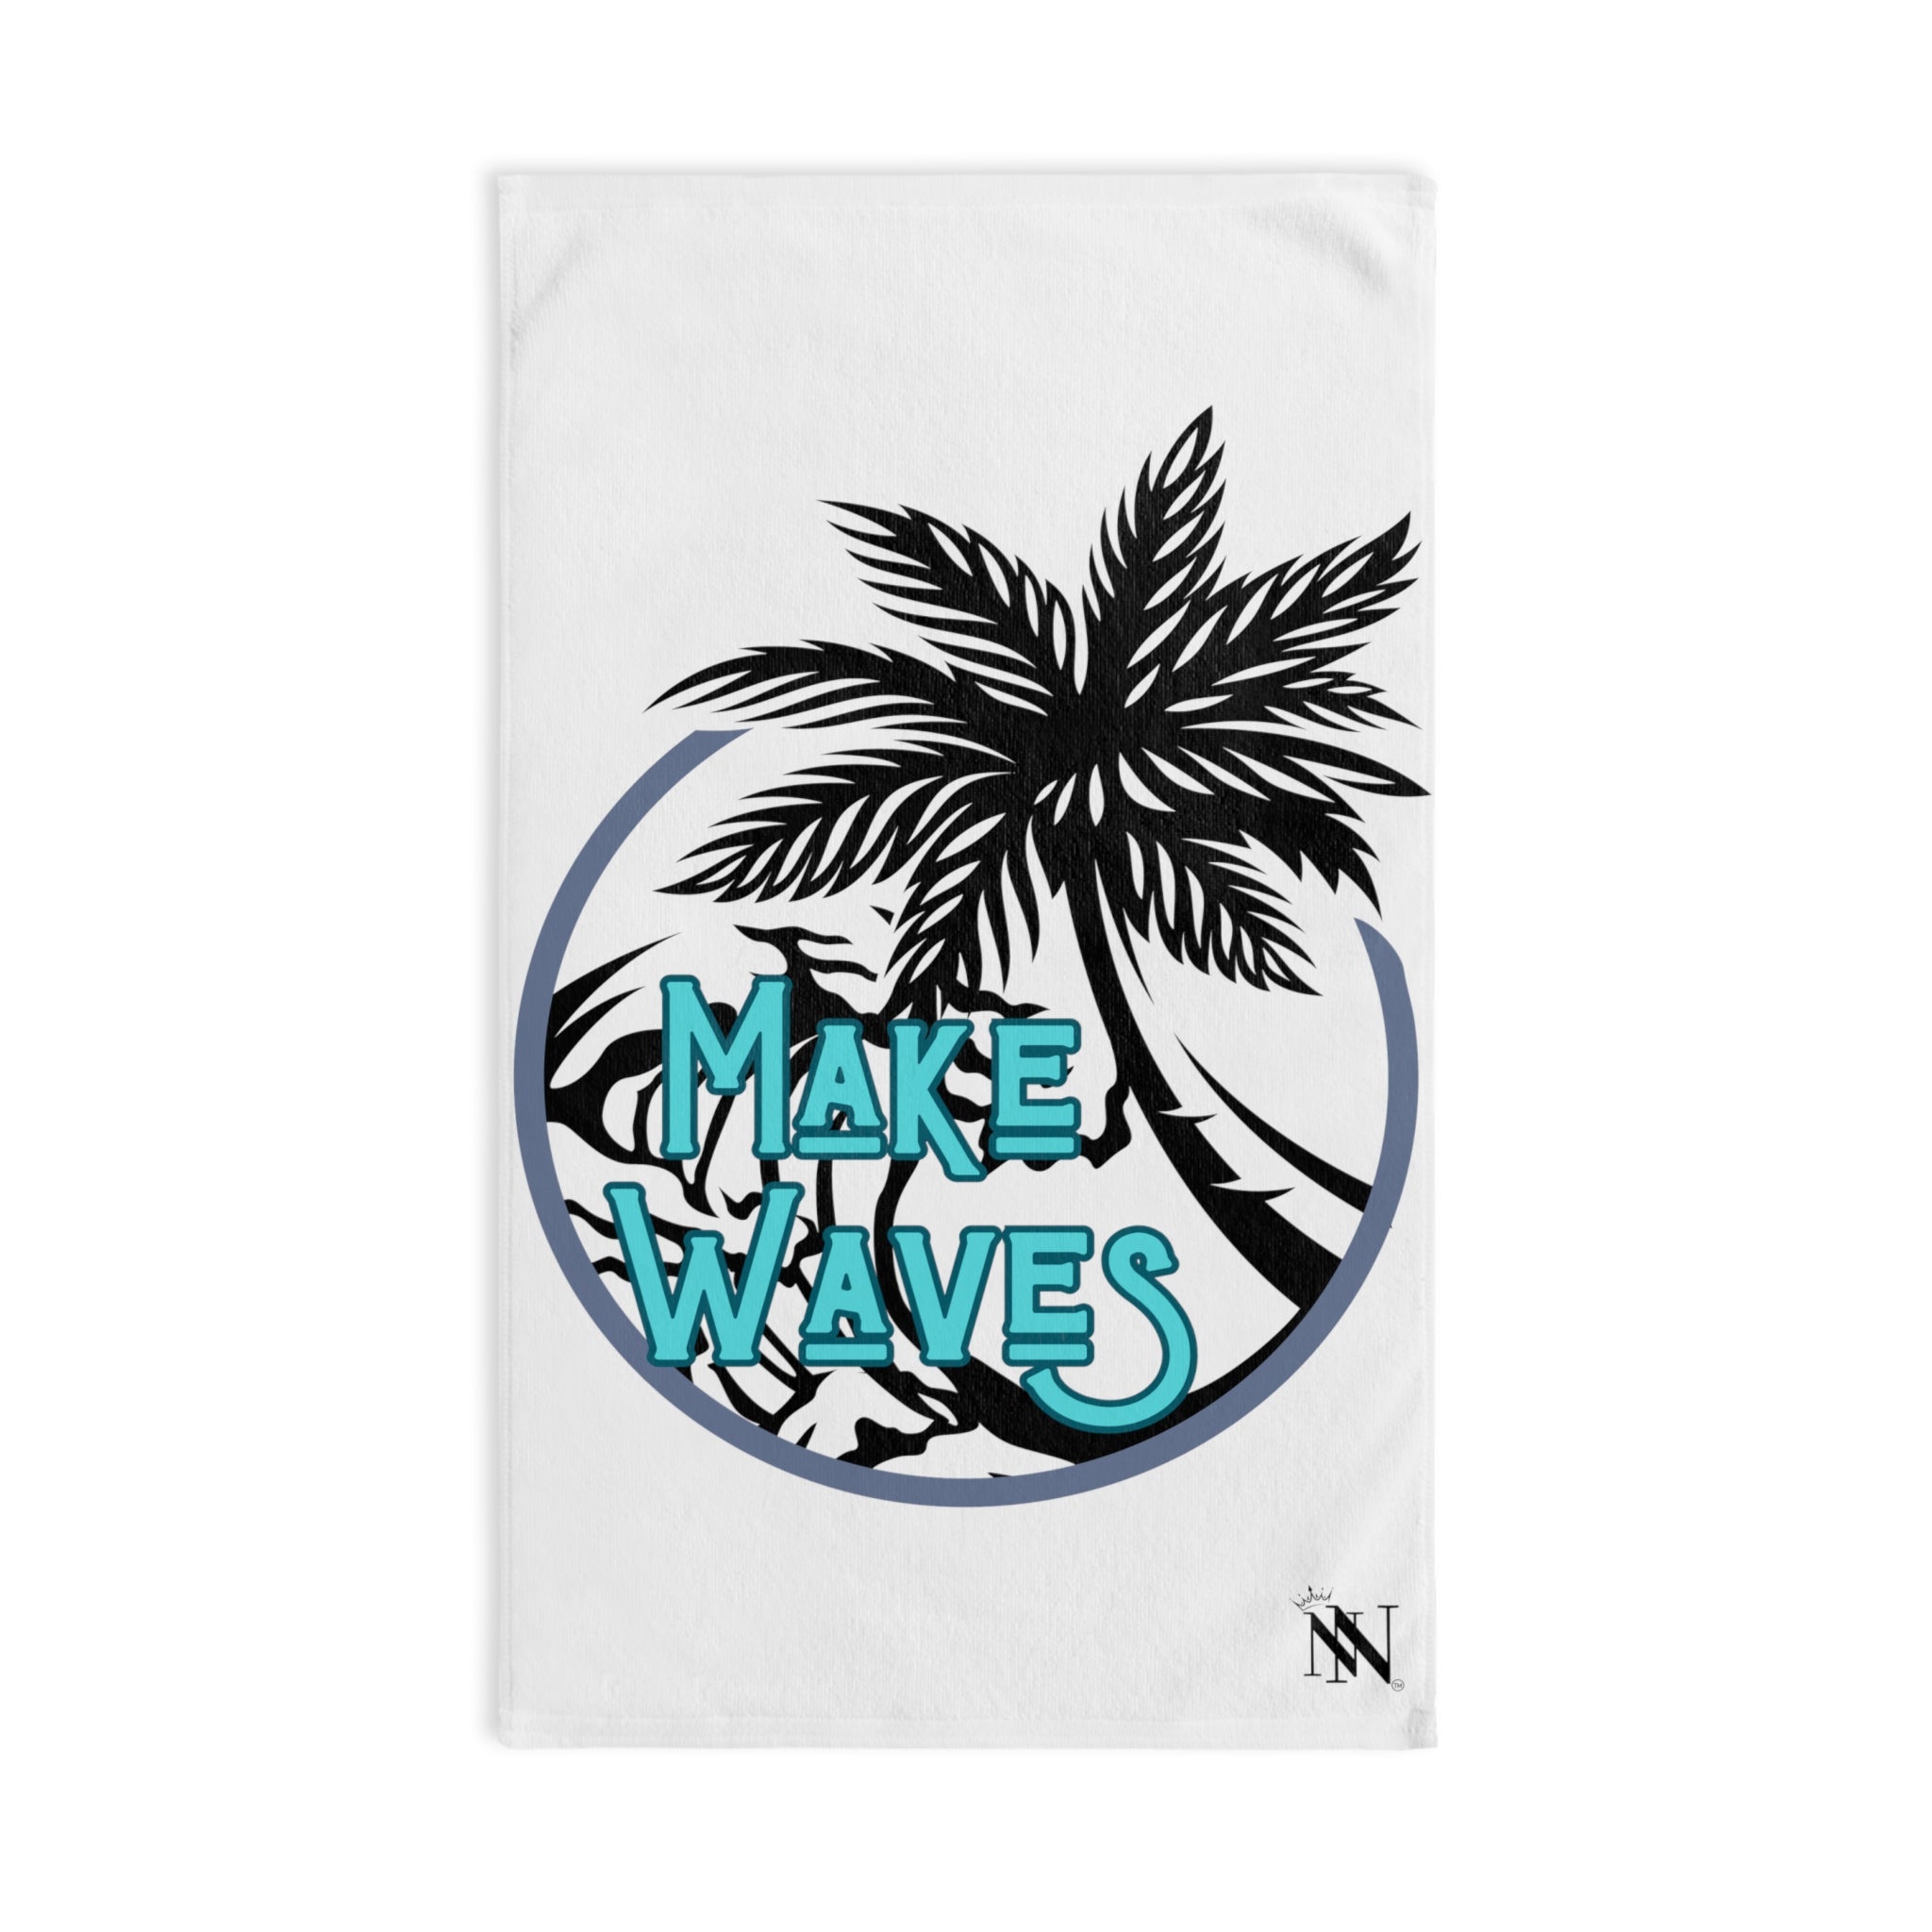 Make Waves White | Funny Gifts for Men - Gifts for Him - Birthday Gifts for Men, Him, Her, Husband, Boyfriend, Girlfriend, New Couple Gifts, Fathers & Valentines Day Gifts, Christmas Gifts NECTAR NAPKINS